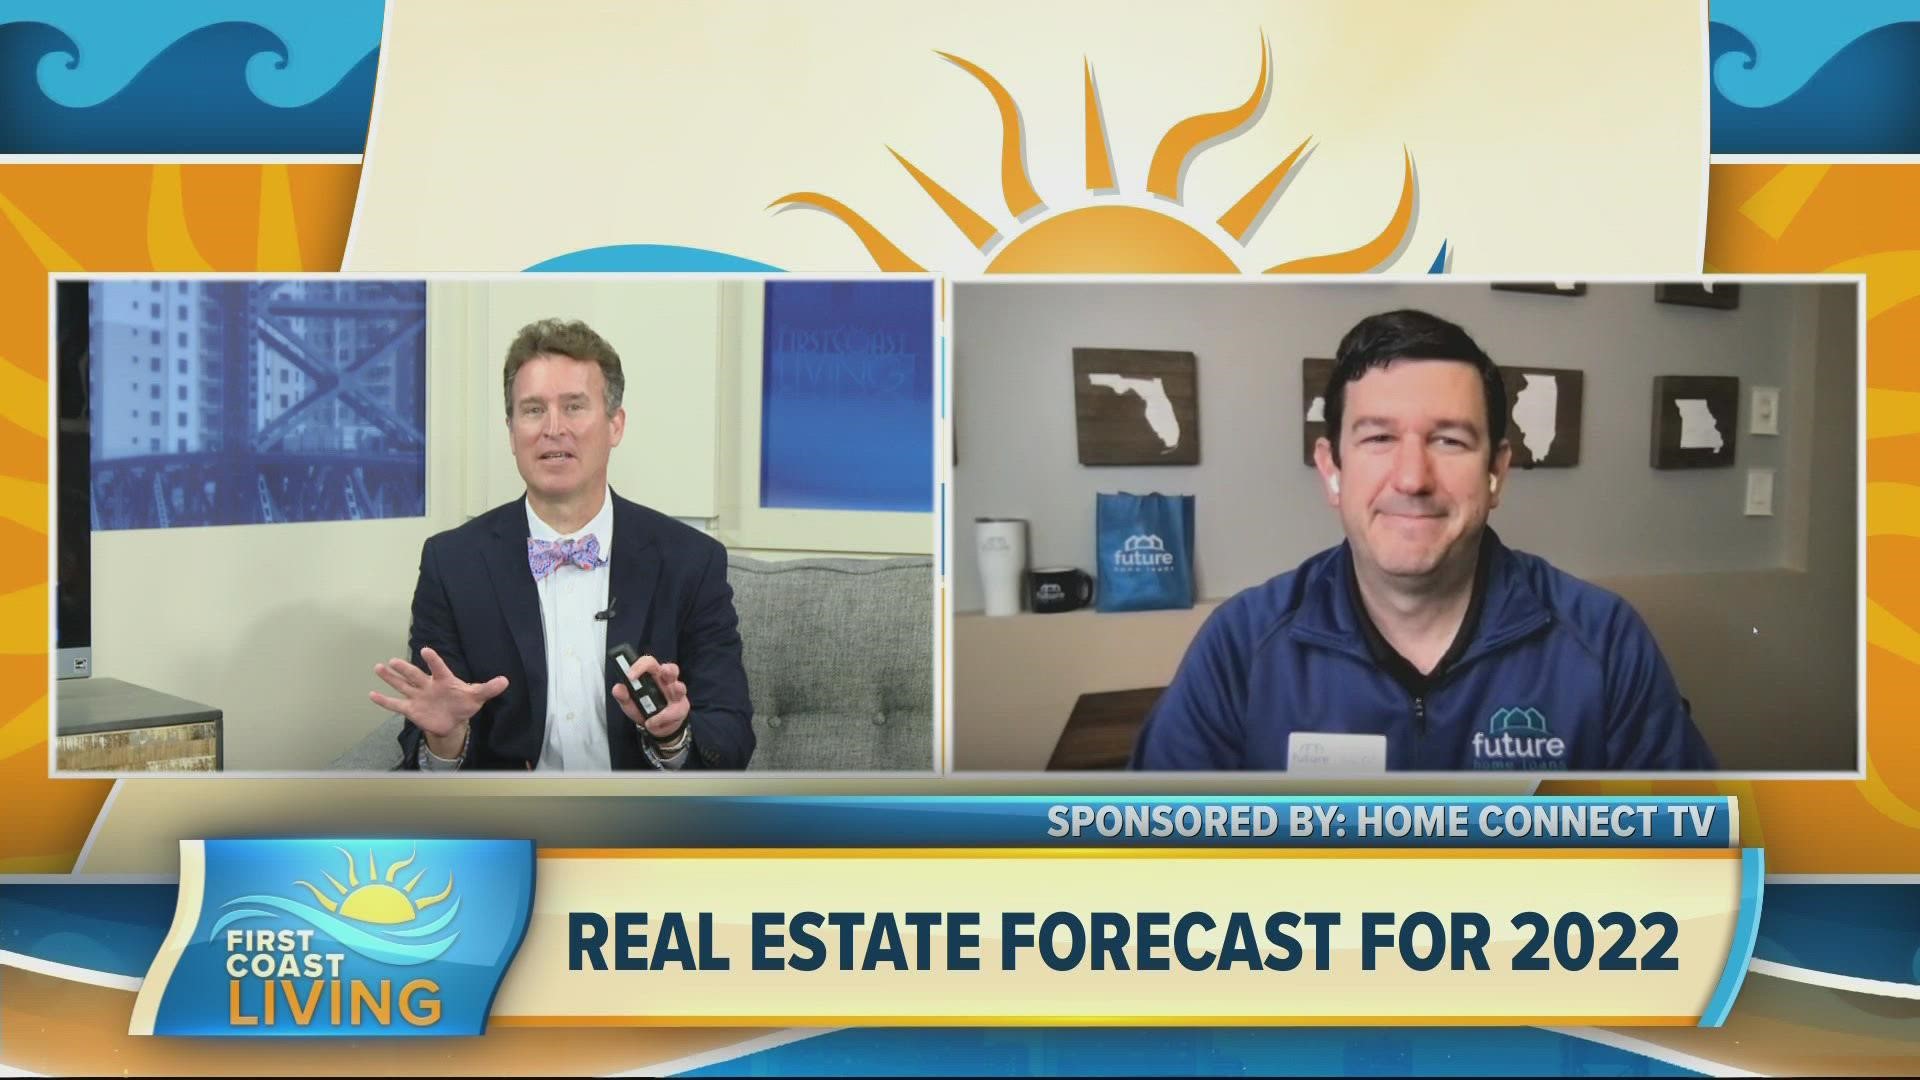 Lee Simanoff, one of our Home Connect TV experts gives his forecast on what rising rates would mean for us in 2022.